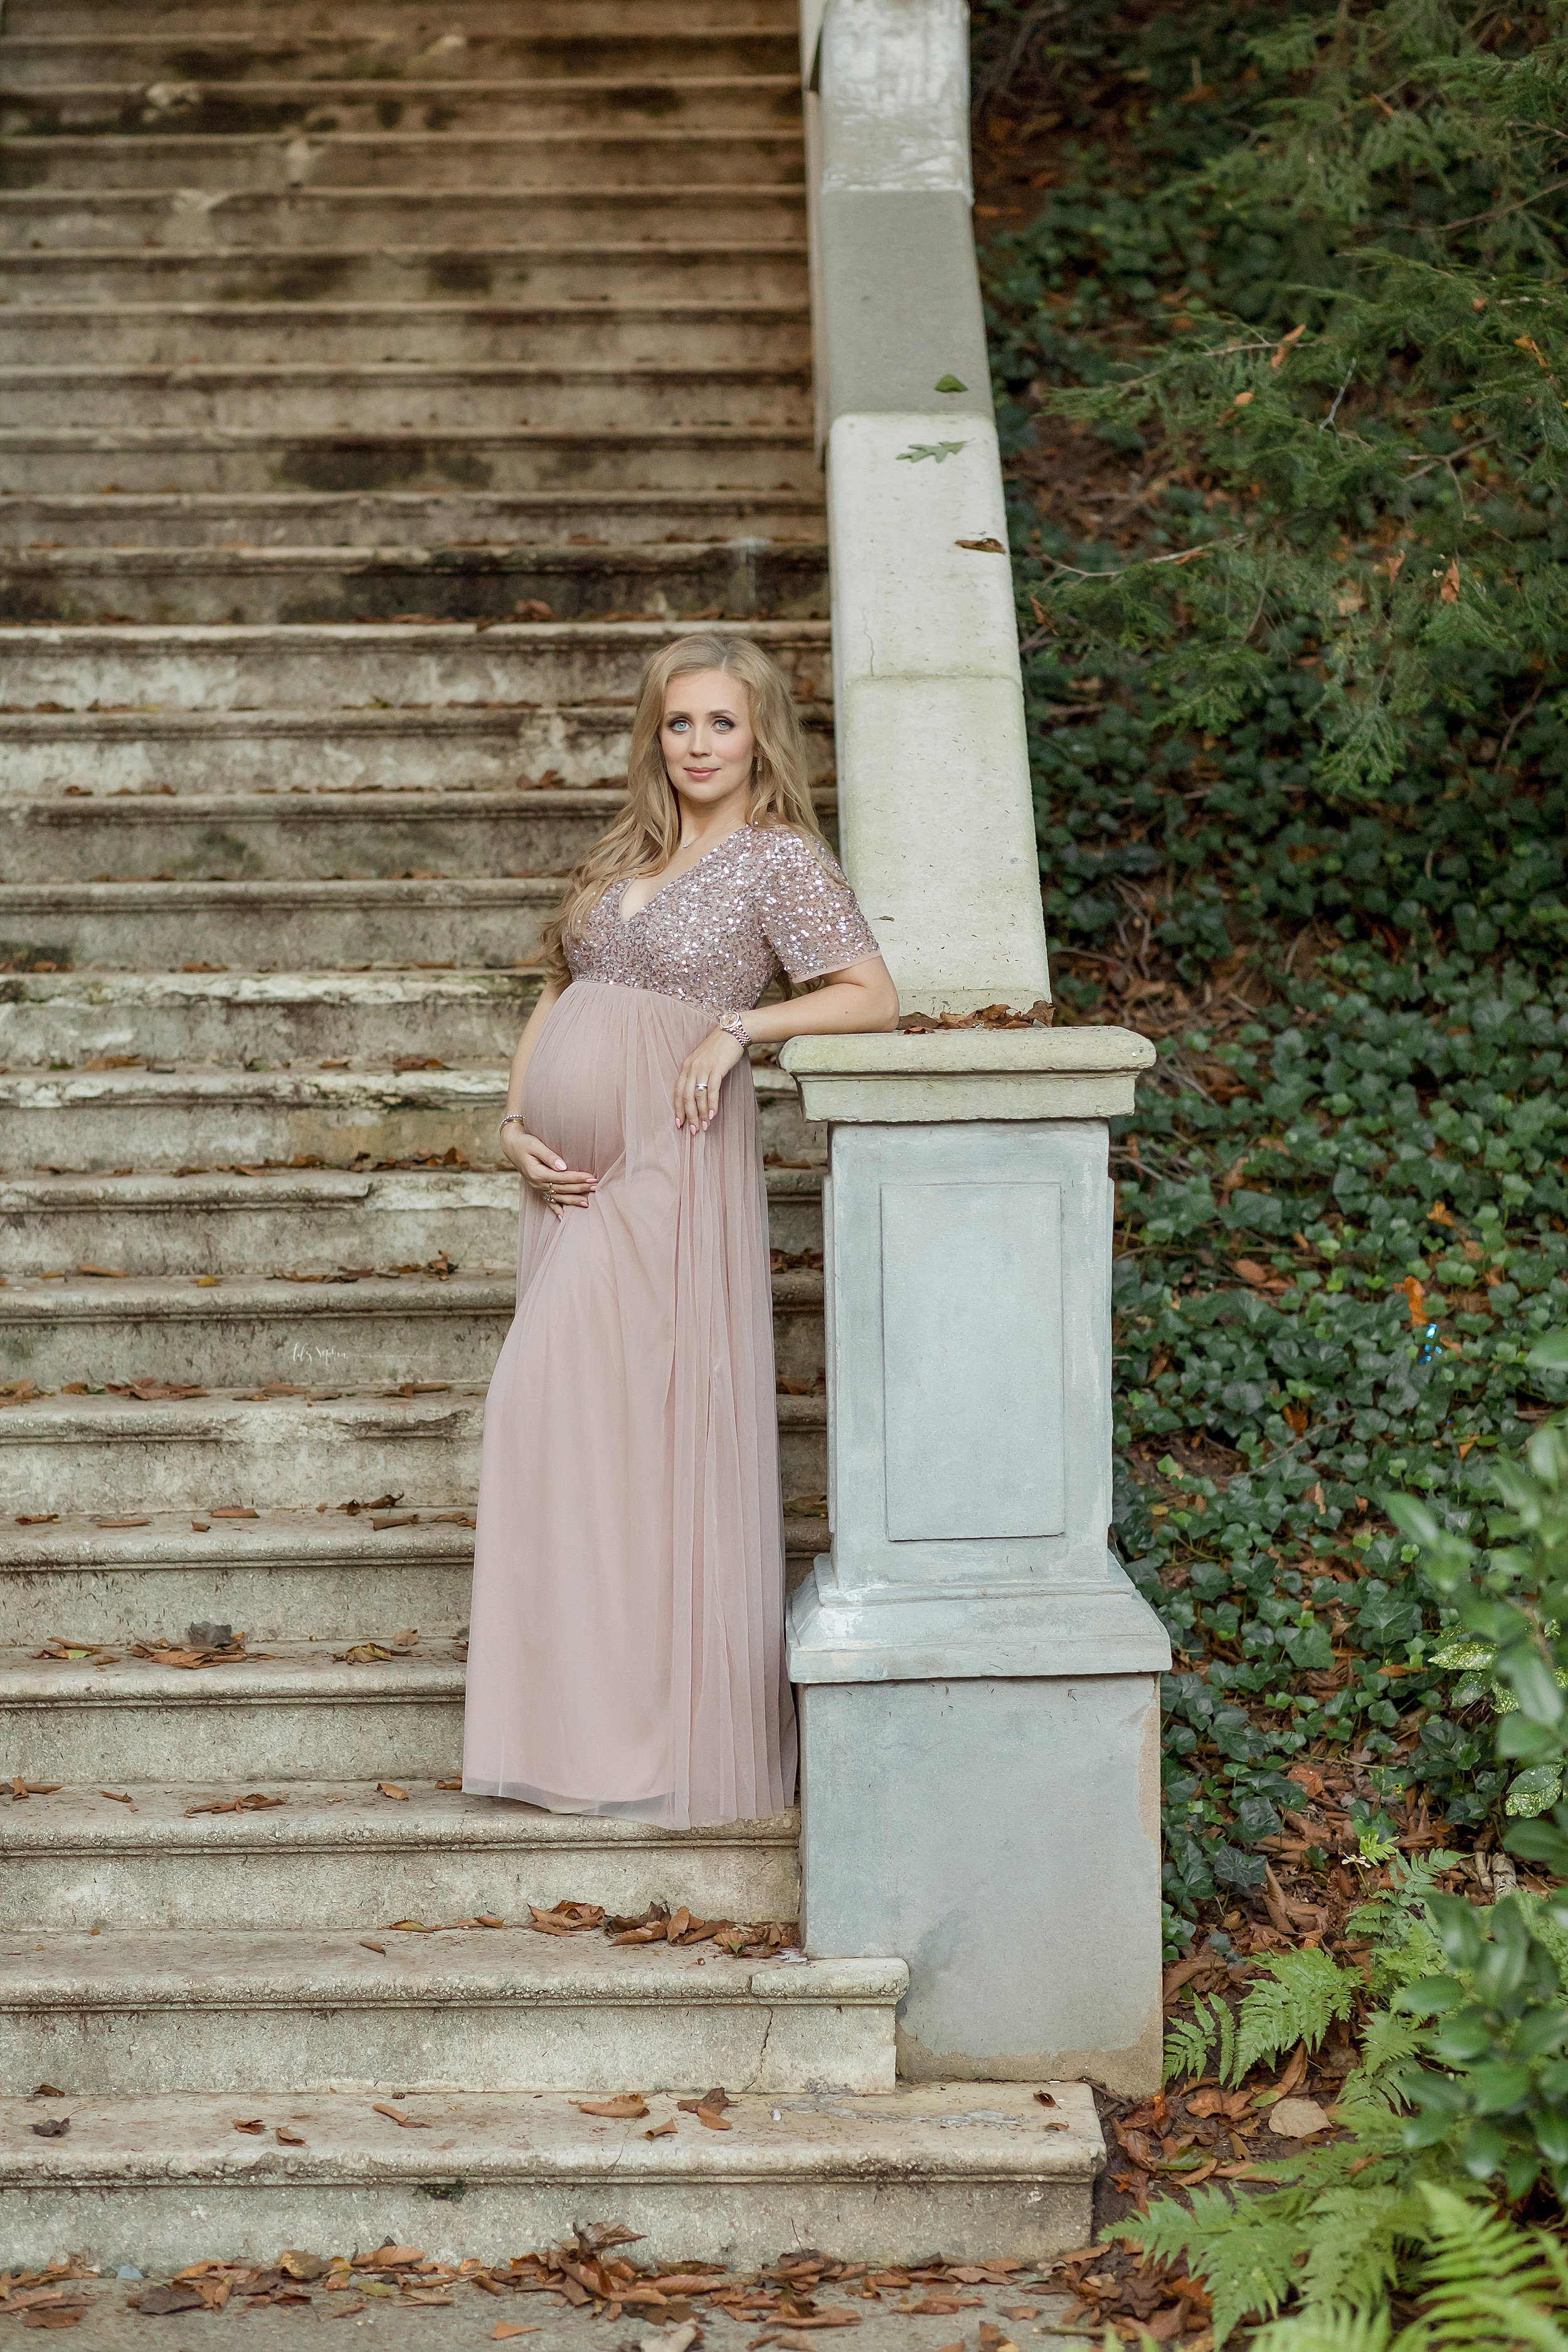 atlanta-buckhead-brookhaven-inman-decatur-lily-sophia-photography-maternity-pregnancy-photographer-portraits-studio-grant-park-intown-couple-russian-expecting-baby-boy-outdoors-gardens-sunset-fall_0662.jpg